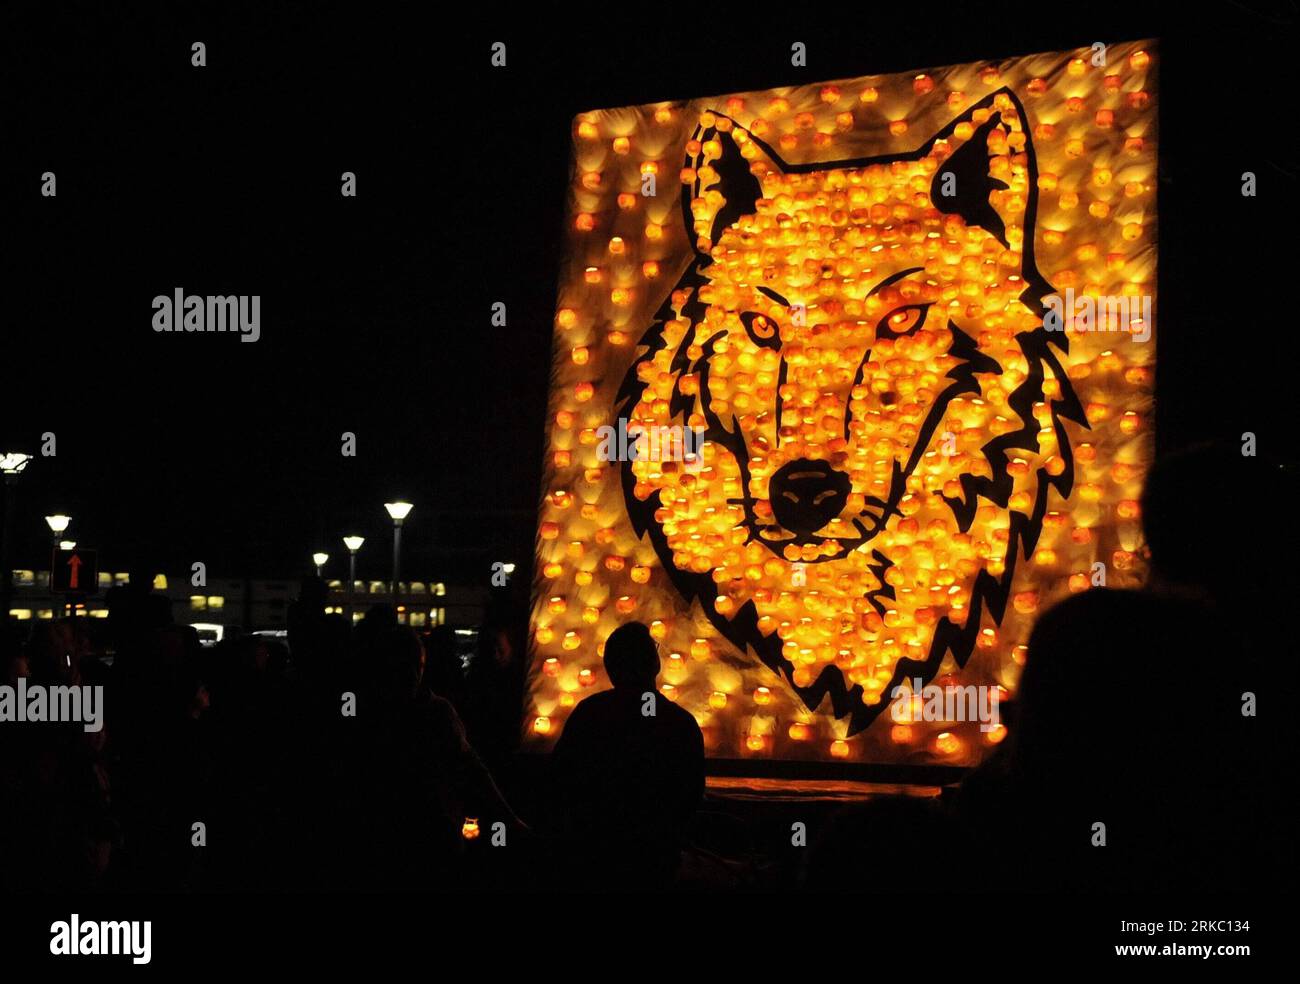 Bildnummer: 54636884  Datum: 13.11.2010  Copyright: imago/Xinhua (101114) --ZURICH, Nov. 14, 2010 (Xinhua) -- The image of a wolf head made of turnip lamps is paraded during the Raebechilbi (Turnip Fair) in the village of Richterswil on Lake Zurich, Switzerland, Nov. 13, 2010. Local residents hold Turnip Parade on the second Saturday of every November to mark the transition from autumn to winter. (Xinhua/Yu Yang) SWITZERLAND-ZURICH-TURNIP FAIR PUBLICATIONxNOTxINxCHN Gesellschaft Laterne Laternenfest Tradition Laternenumzug kbdig xdp 2010 quer premiumd  o0 Objekte    Bildnummer 54636884 Date 13 Stock Photo